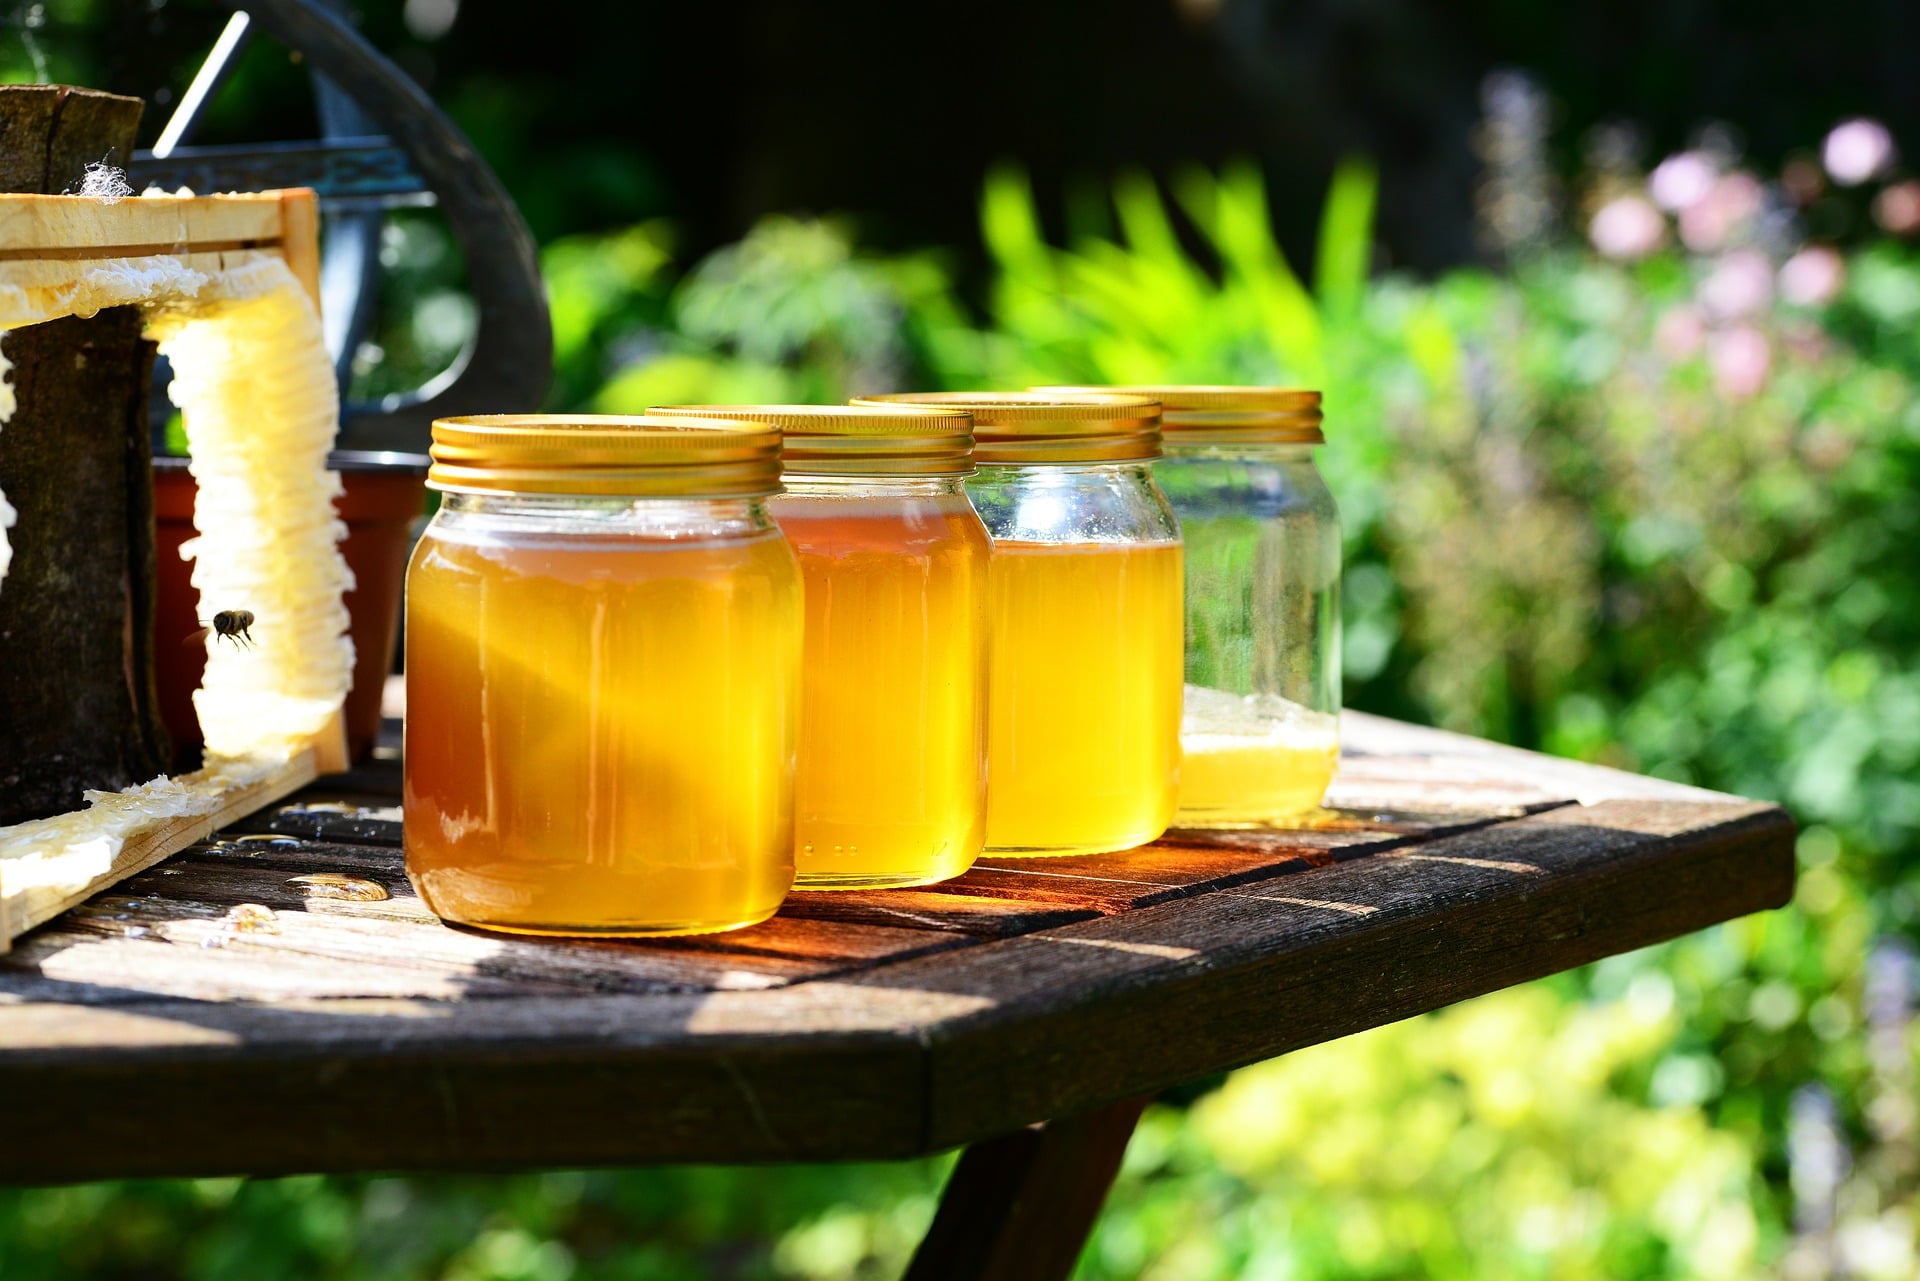 jars of honey on the table